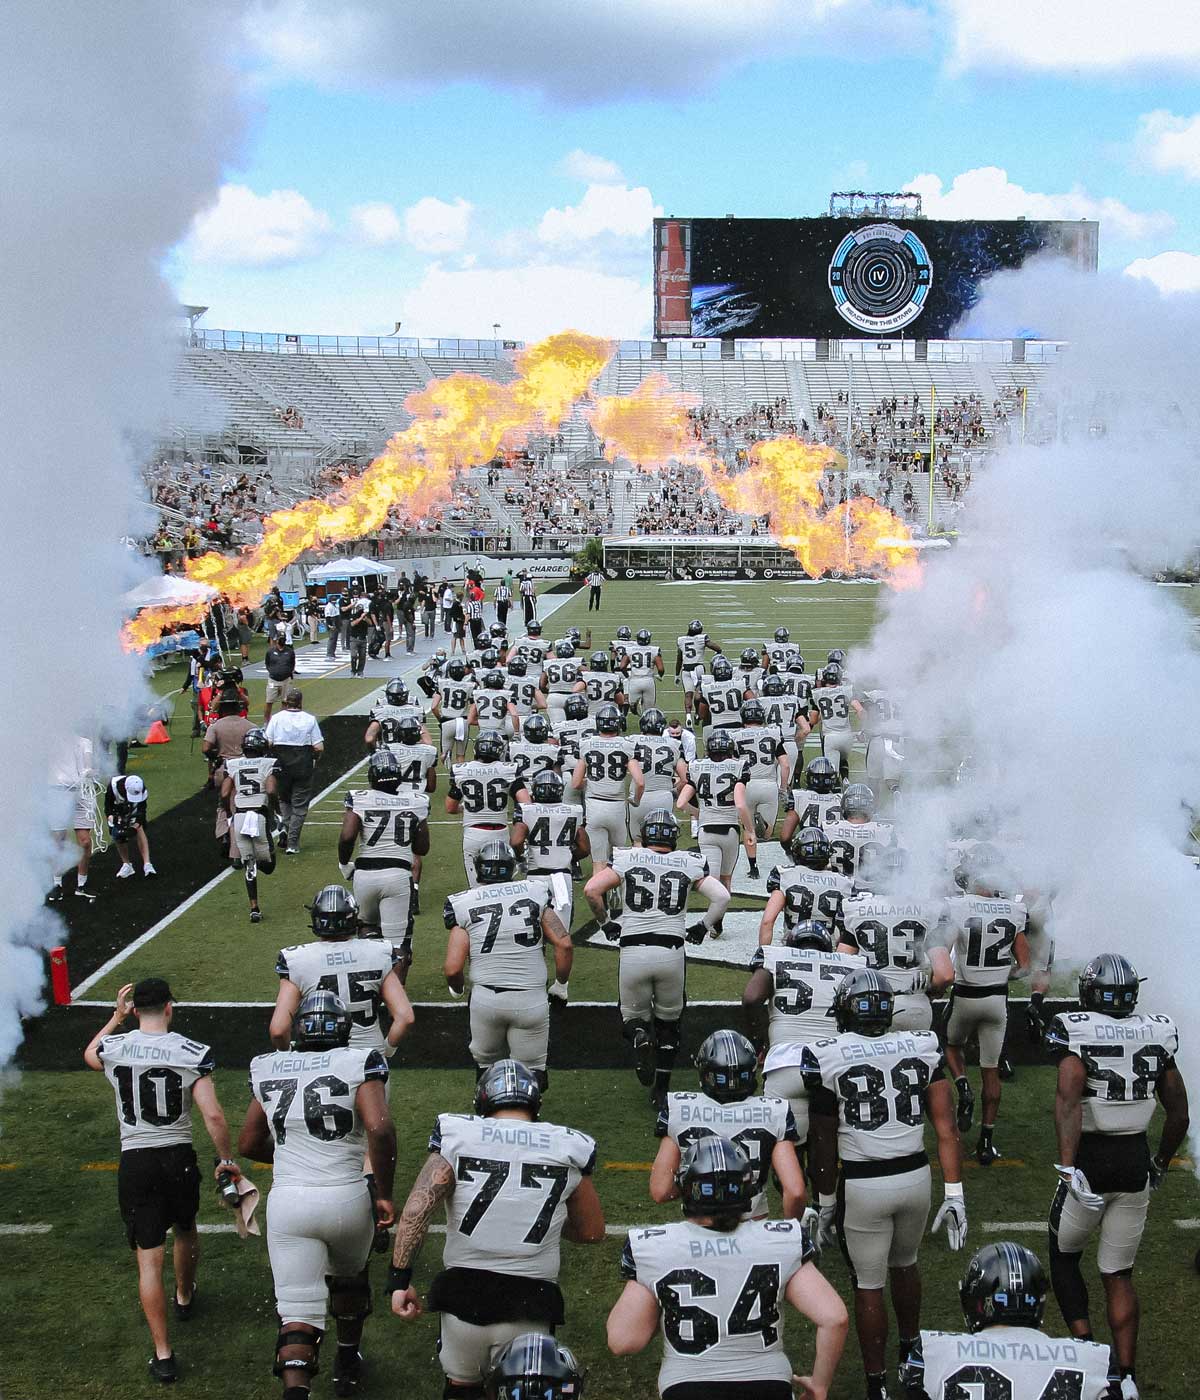 UCF football team runs onto the field with smoke and fire tunnel